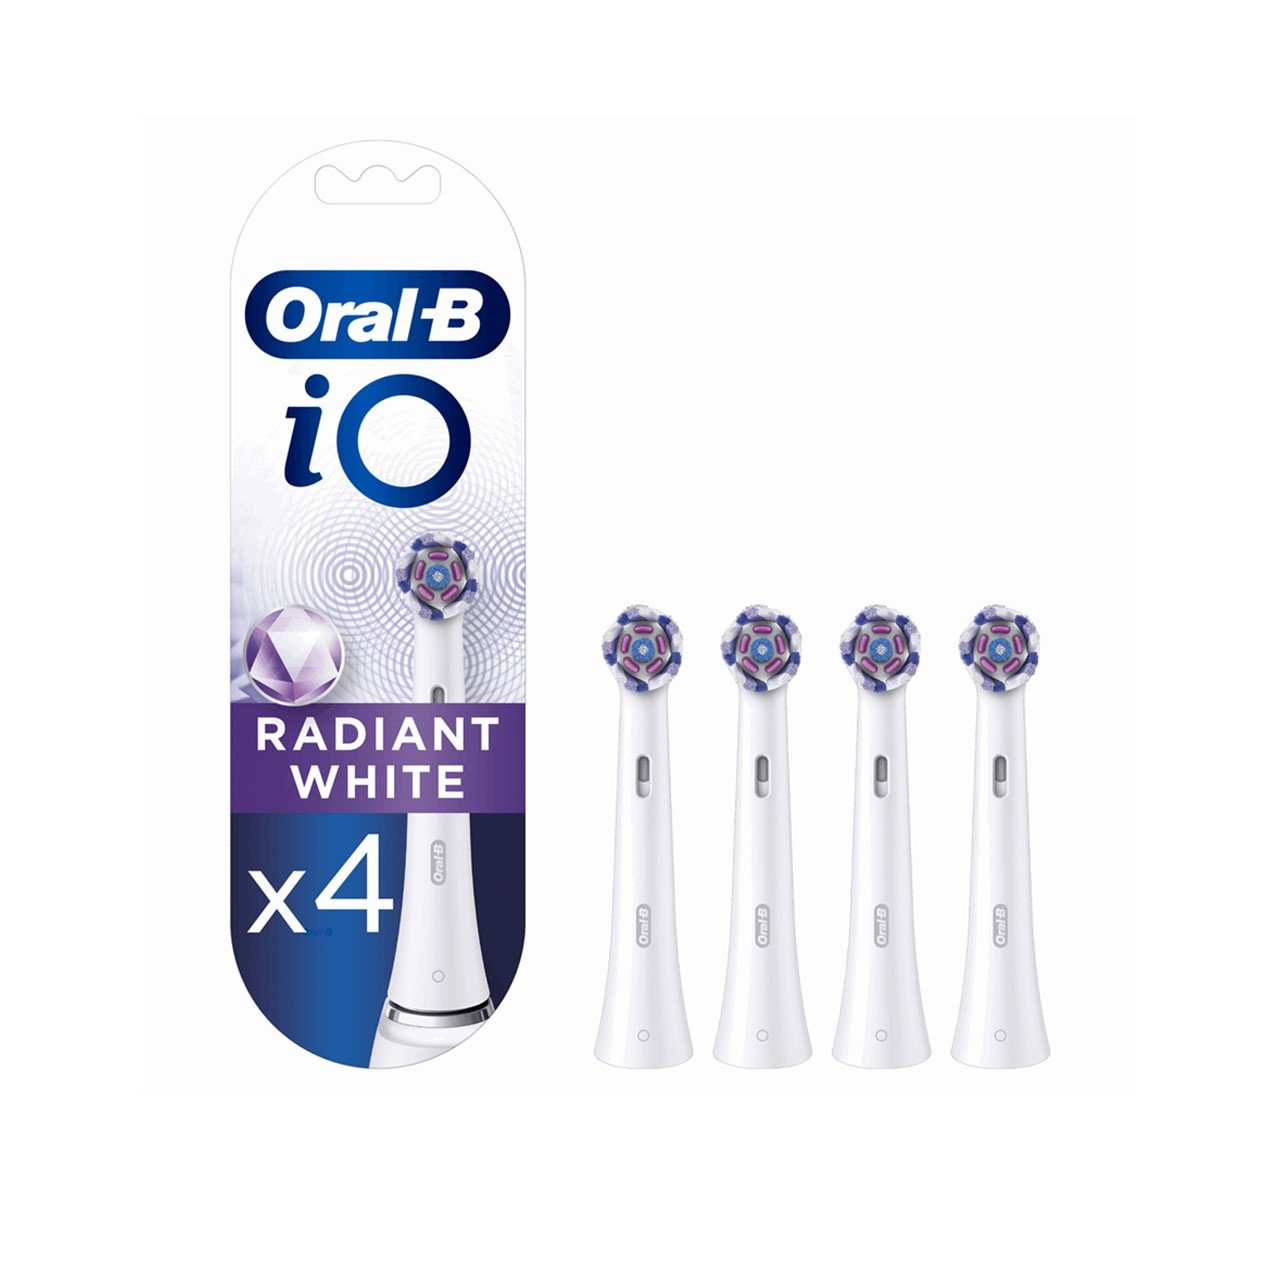 Oral-B iO Radiant White Replacement Head Electric Toothbrush White x4